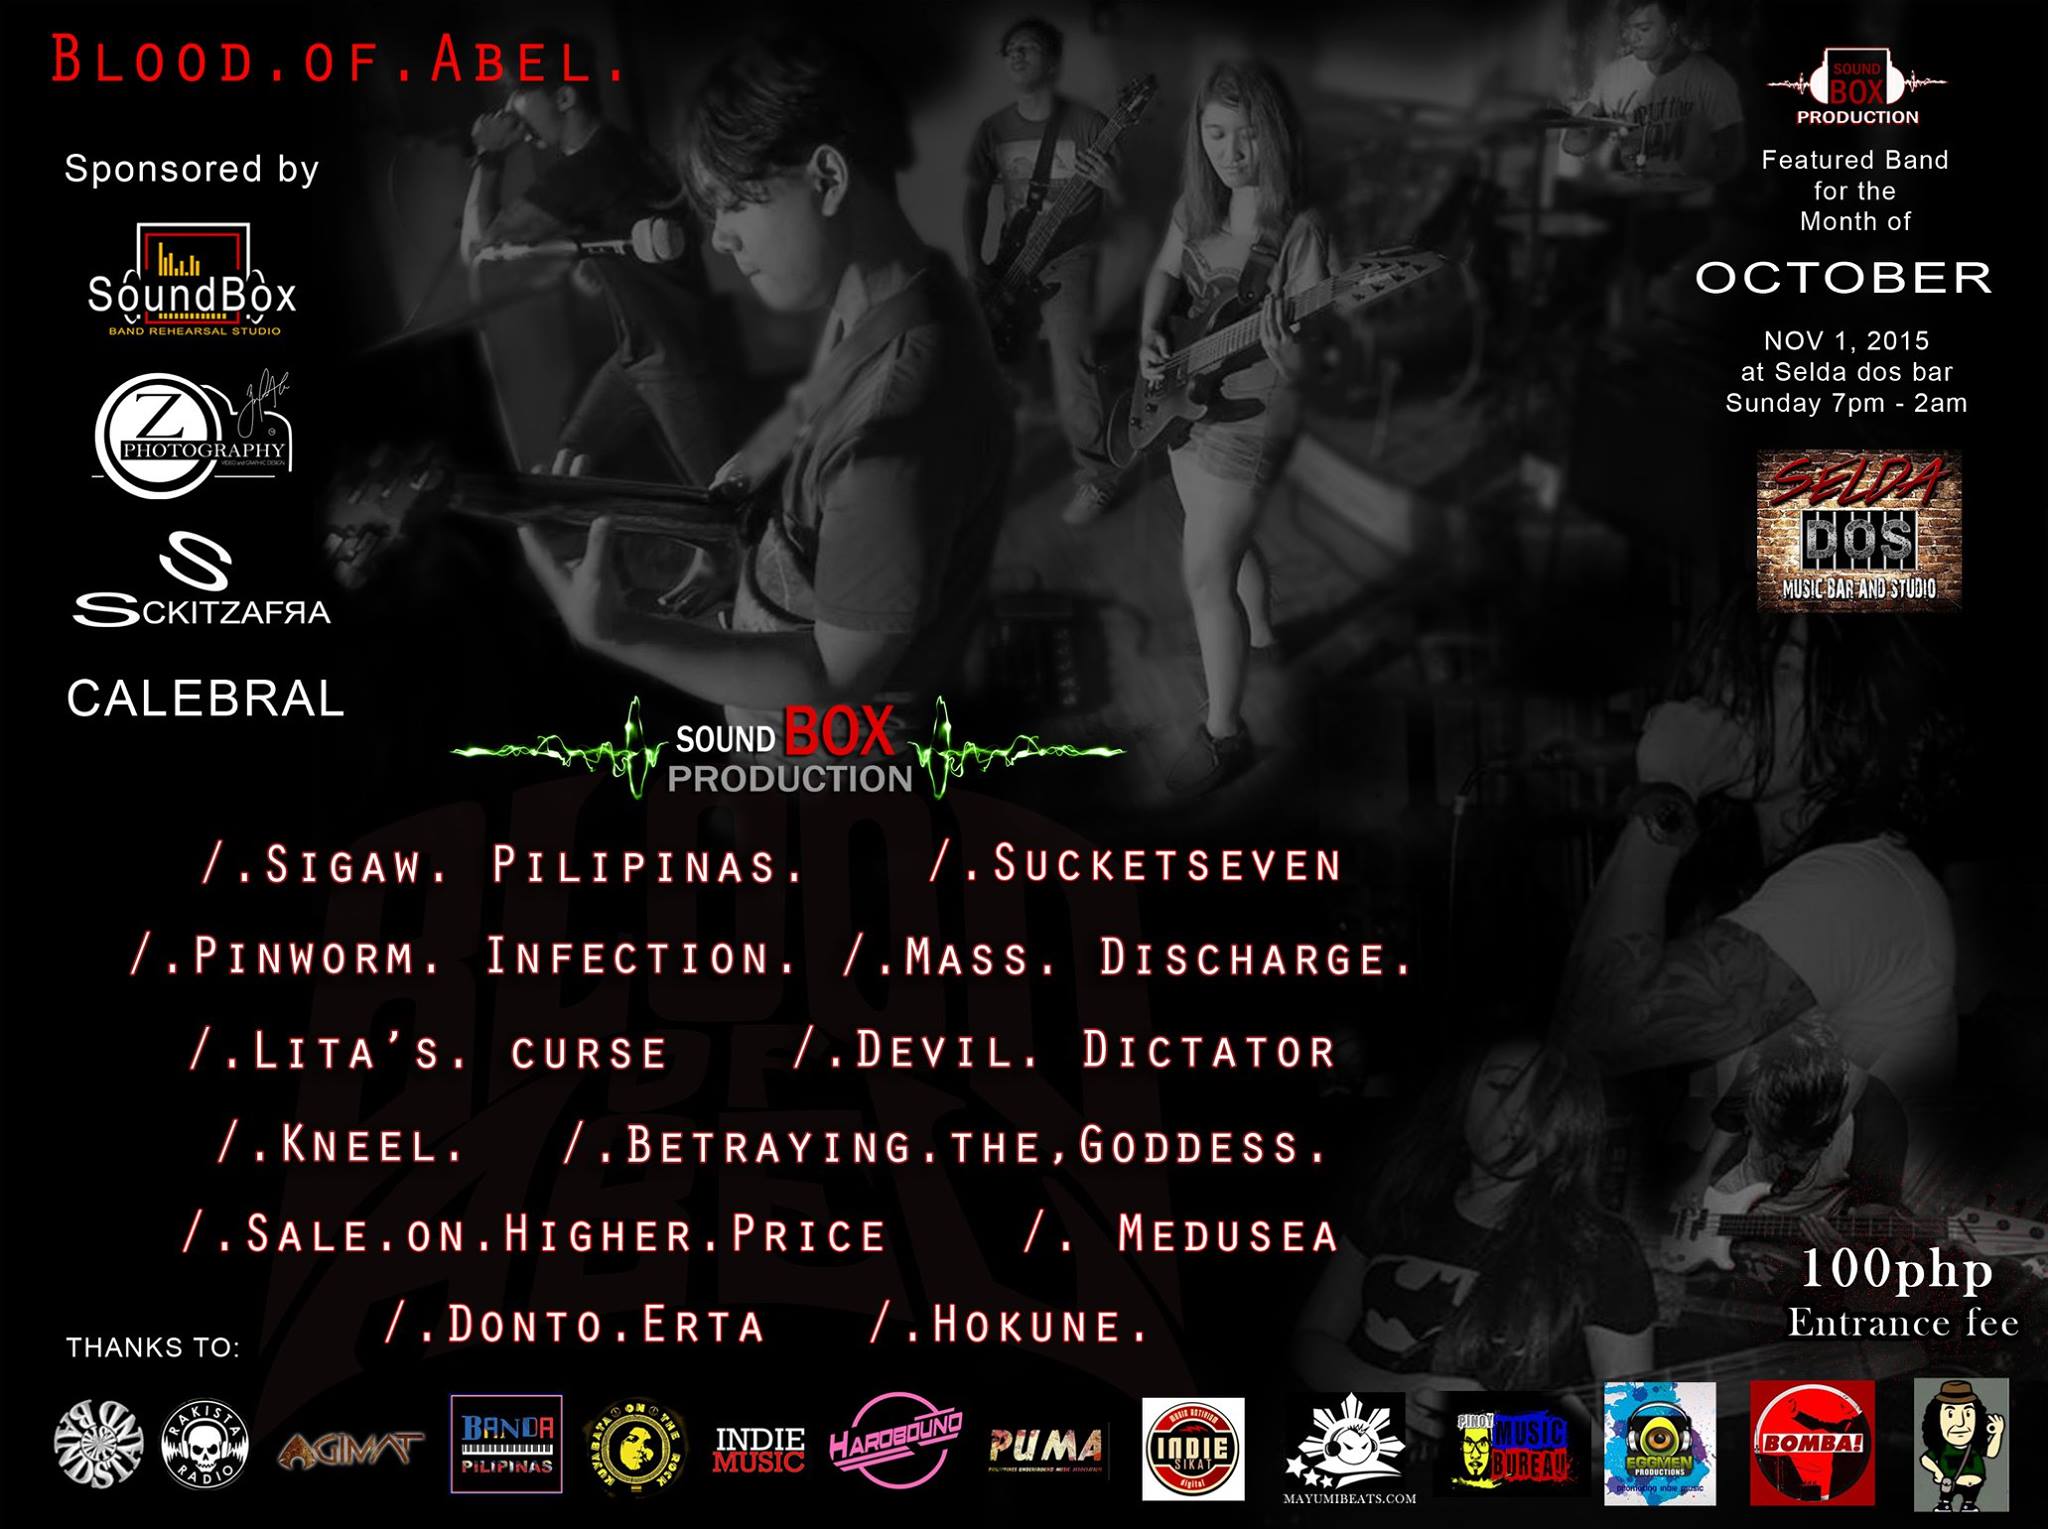 Sunday, November 1 Blood Of Abel sound box Production's featured band for the Month of October Nov 1 at Selda-dos with: Sigaw Pilipinas Sucketseven LITA'S CURSE Medusea The Devil Dictator Mass Discharge Cavite Kneel Pinworm Infection Betraying the Goddess DONTO ERTA Sale on Higher on higher price Hokune This event sponsored by: Sound Box Band Rehearsal Studio . Z Photography and design. CALEBRAL and Sckitzafra Thanks to: Bandstand Philippines , KUYABATA ON THE ROCK , Pinoy Music Bureau - PMB Agimat: Sining at Kulturang Pinoy , Banda Pilipinas , Rakista Radio , Indie-SIKAT, Indie Music , Hardbound Philippines Underground Music Association , Eggmen Productions. Bomba Press , Rakrakan Na Tayo Entrance fee 100.00